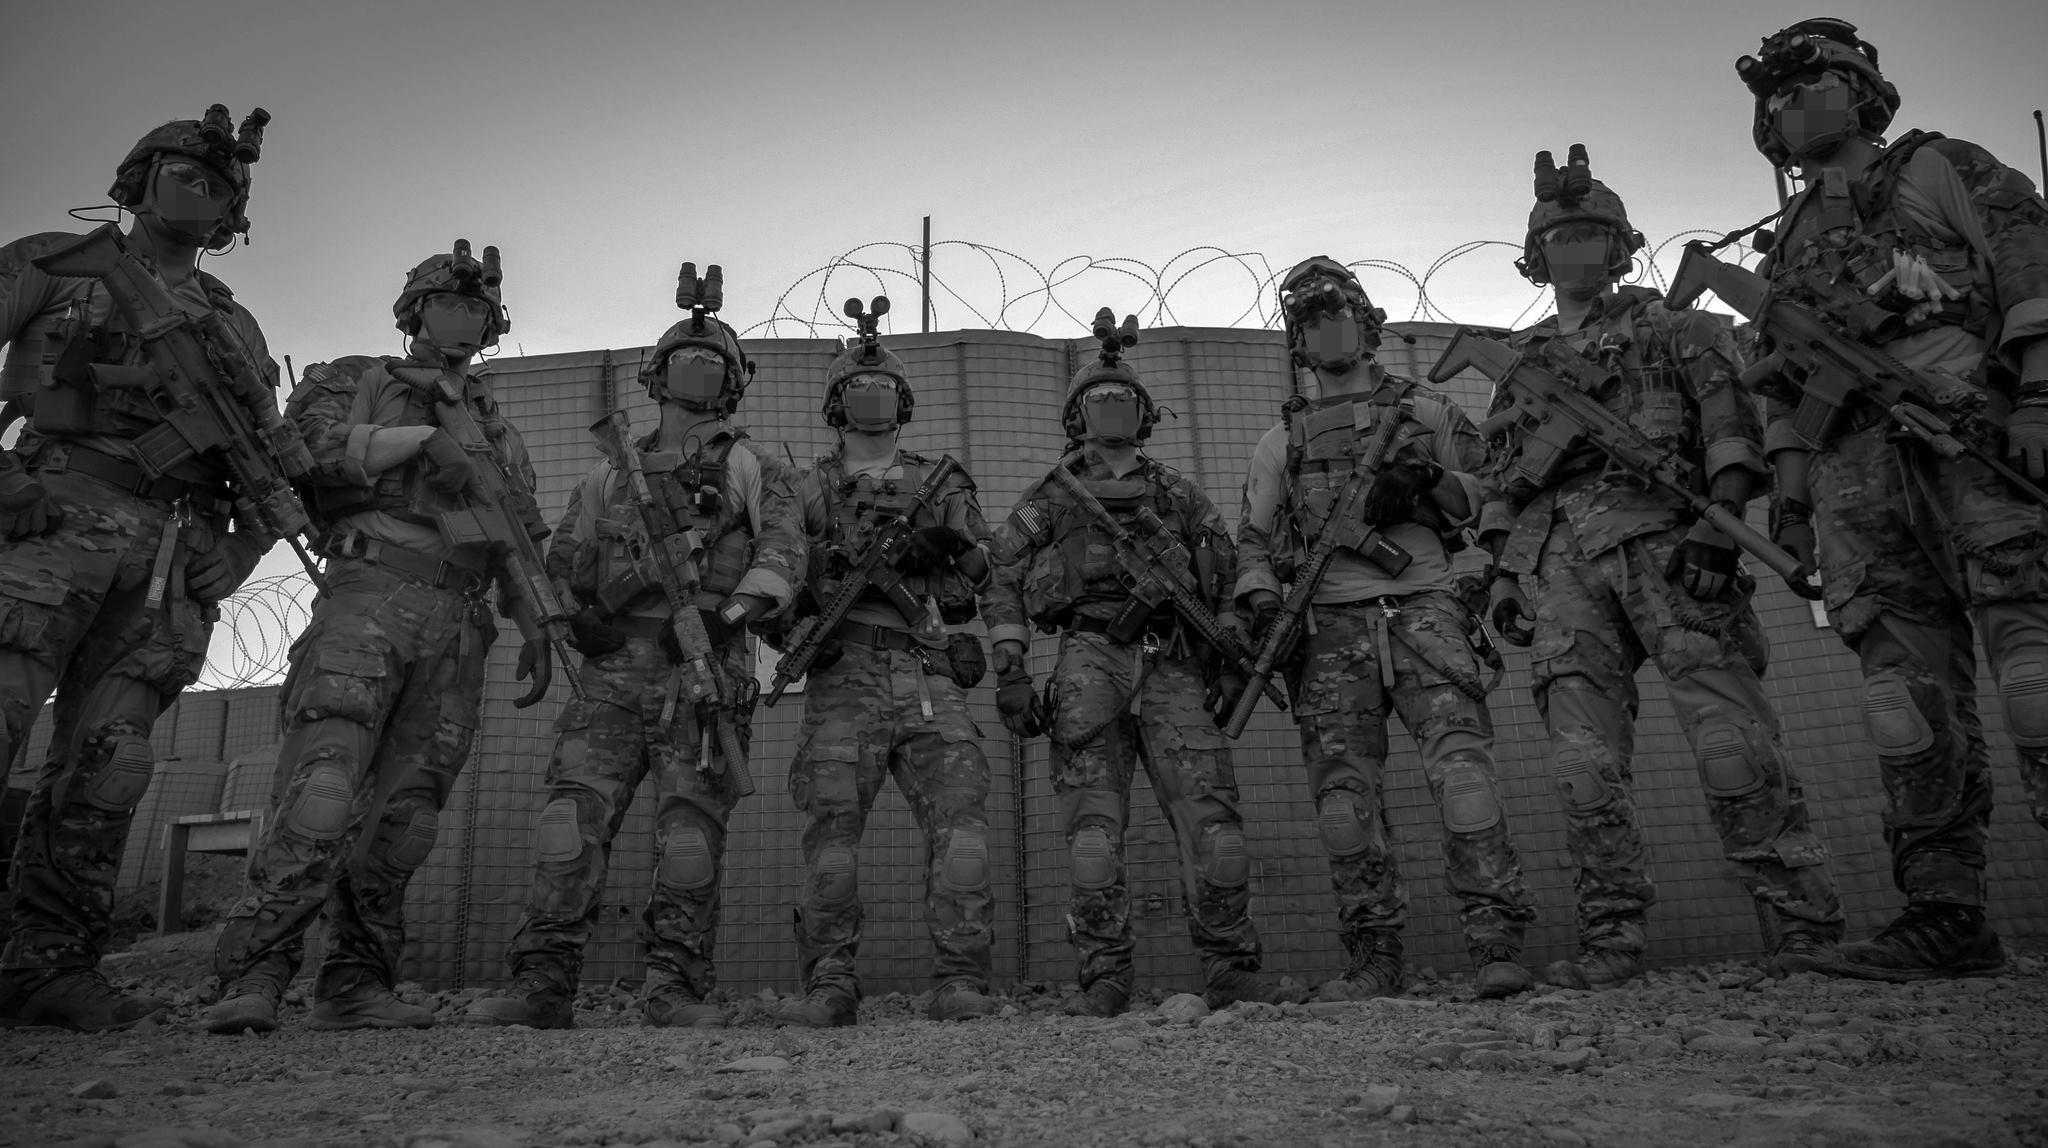 Wallpaper, people, special forces, war, soldier, army gear, black and white, monochrome photography, infantry, troop, militia, military officer, military person 2048x1148